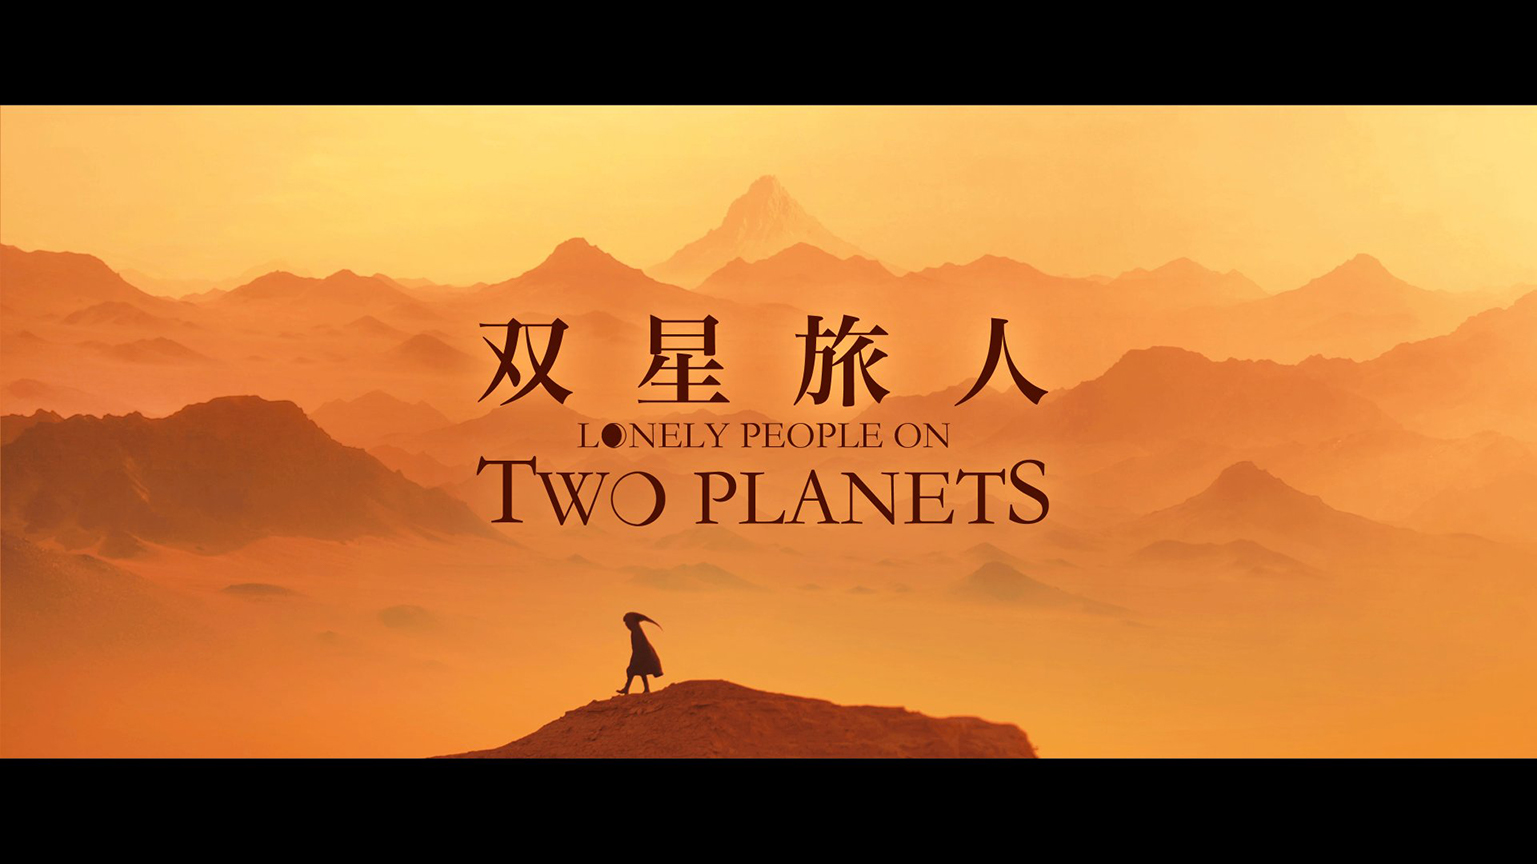 SkyPixel 6th Anniversary Contest Video Group Second Prize Travel 西北废土美学创意航拍《双星旅人》- TWO PLANETS